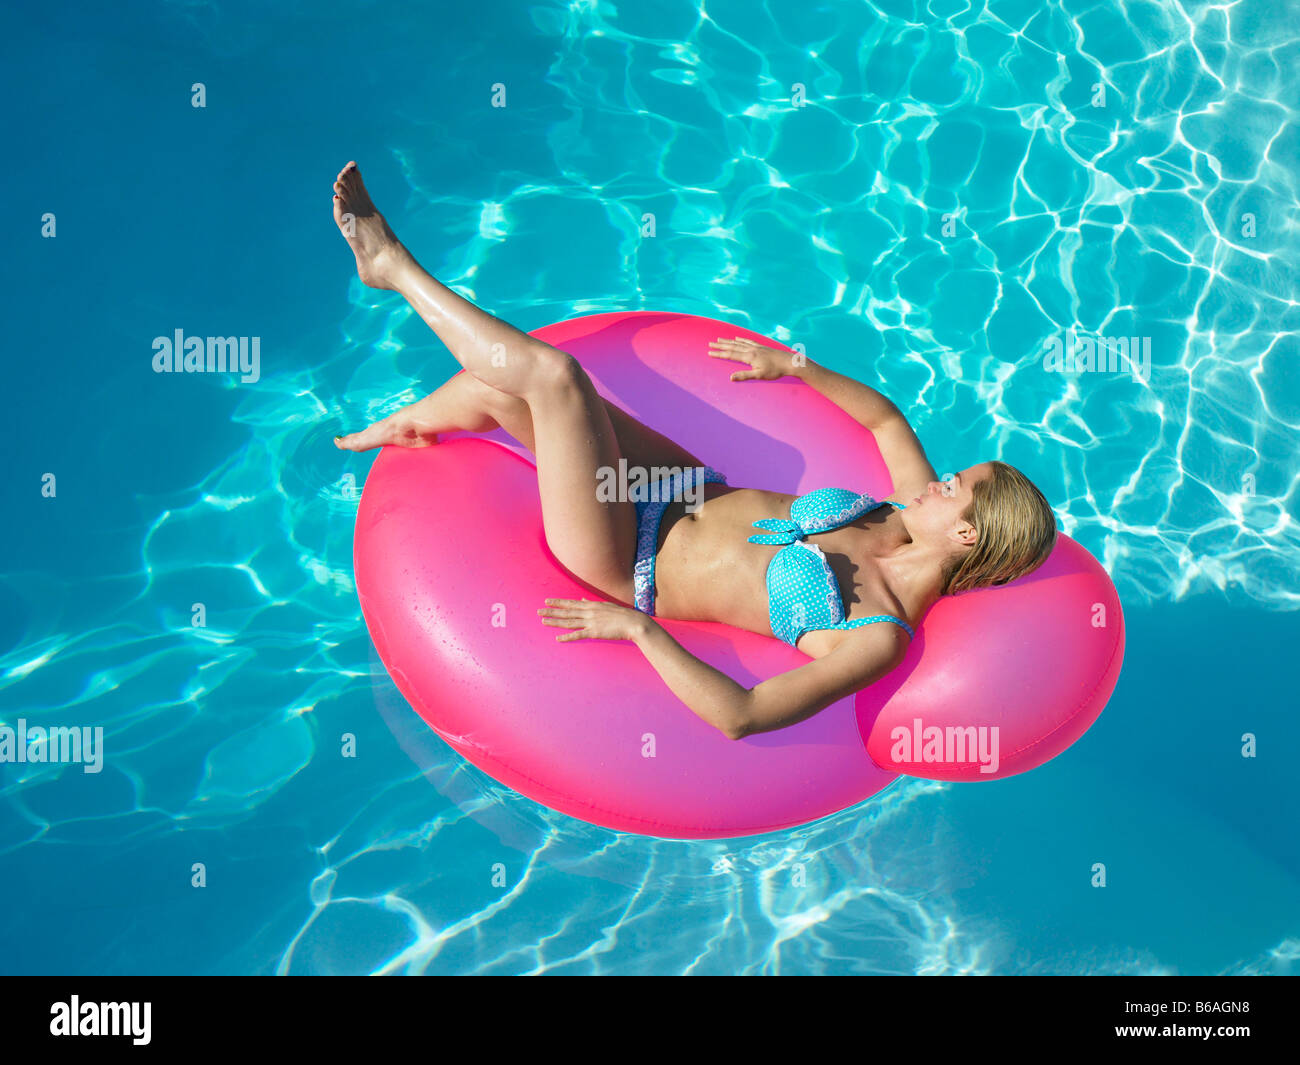 Woman on inflatable chair in pool Stock Photo